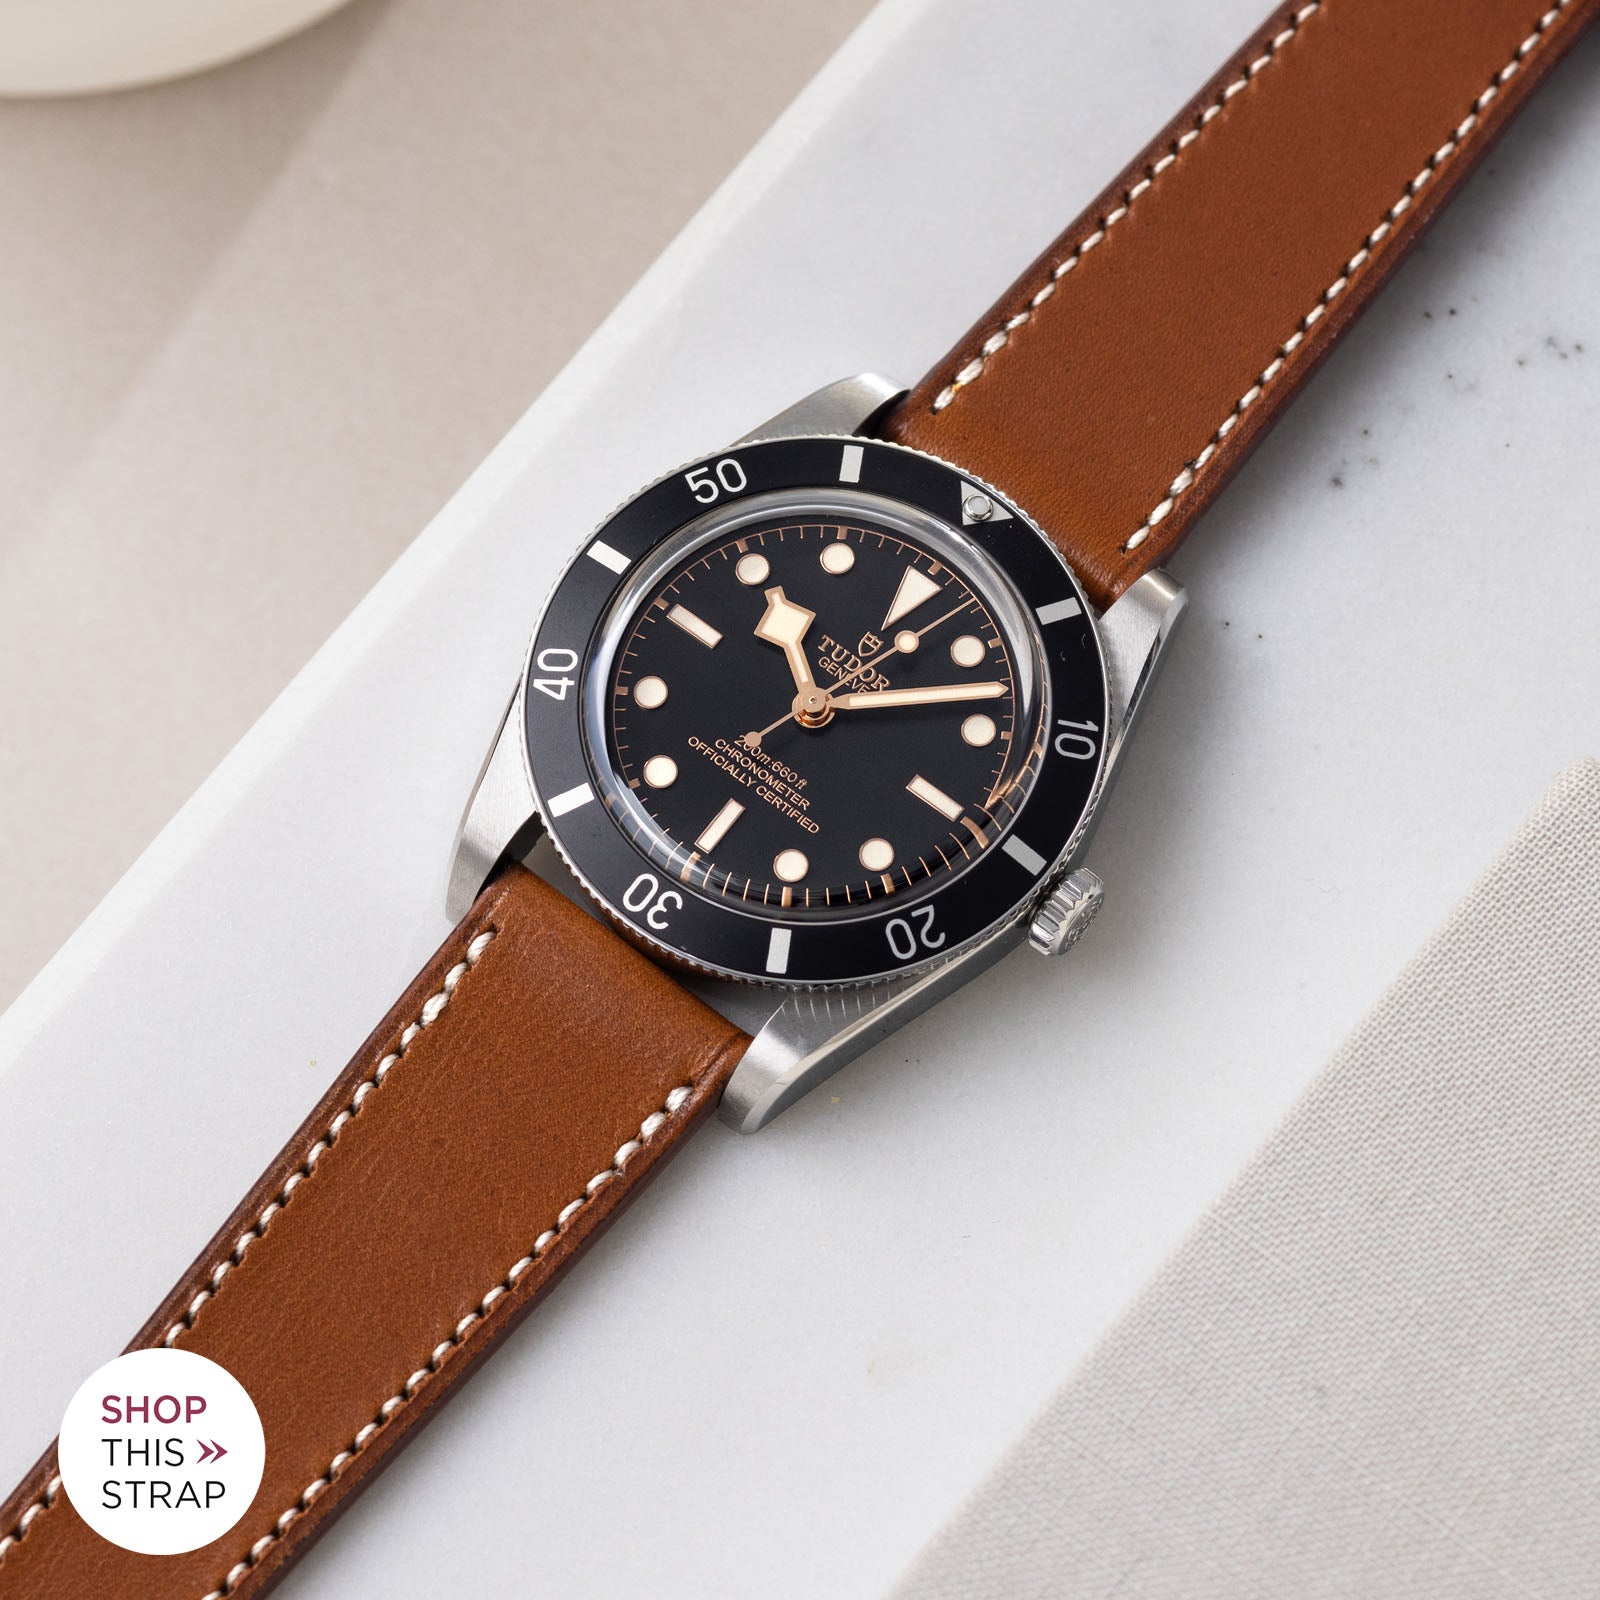 Bulang and Sons_Strapguide_Tudor Black Bay 54_314_Barenia Cognac Brown Leather Watch Strap